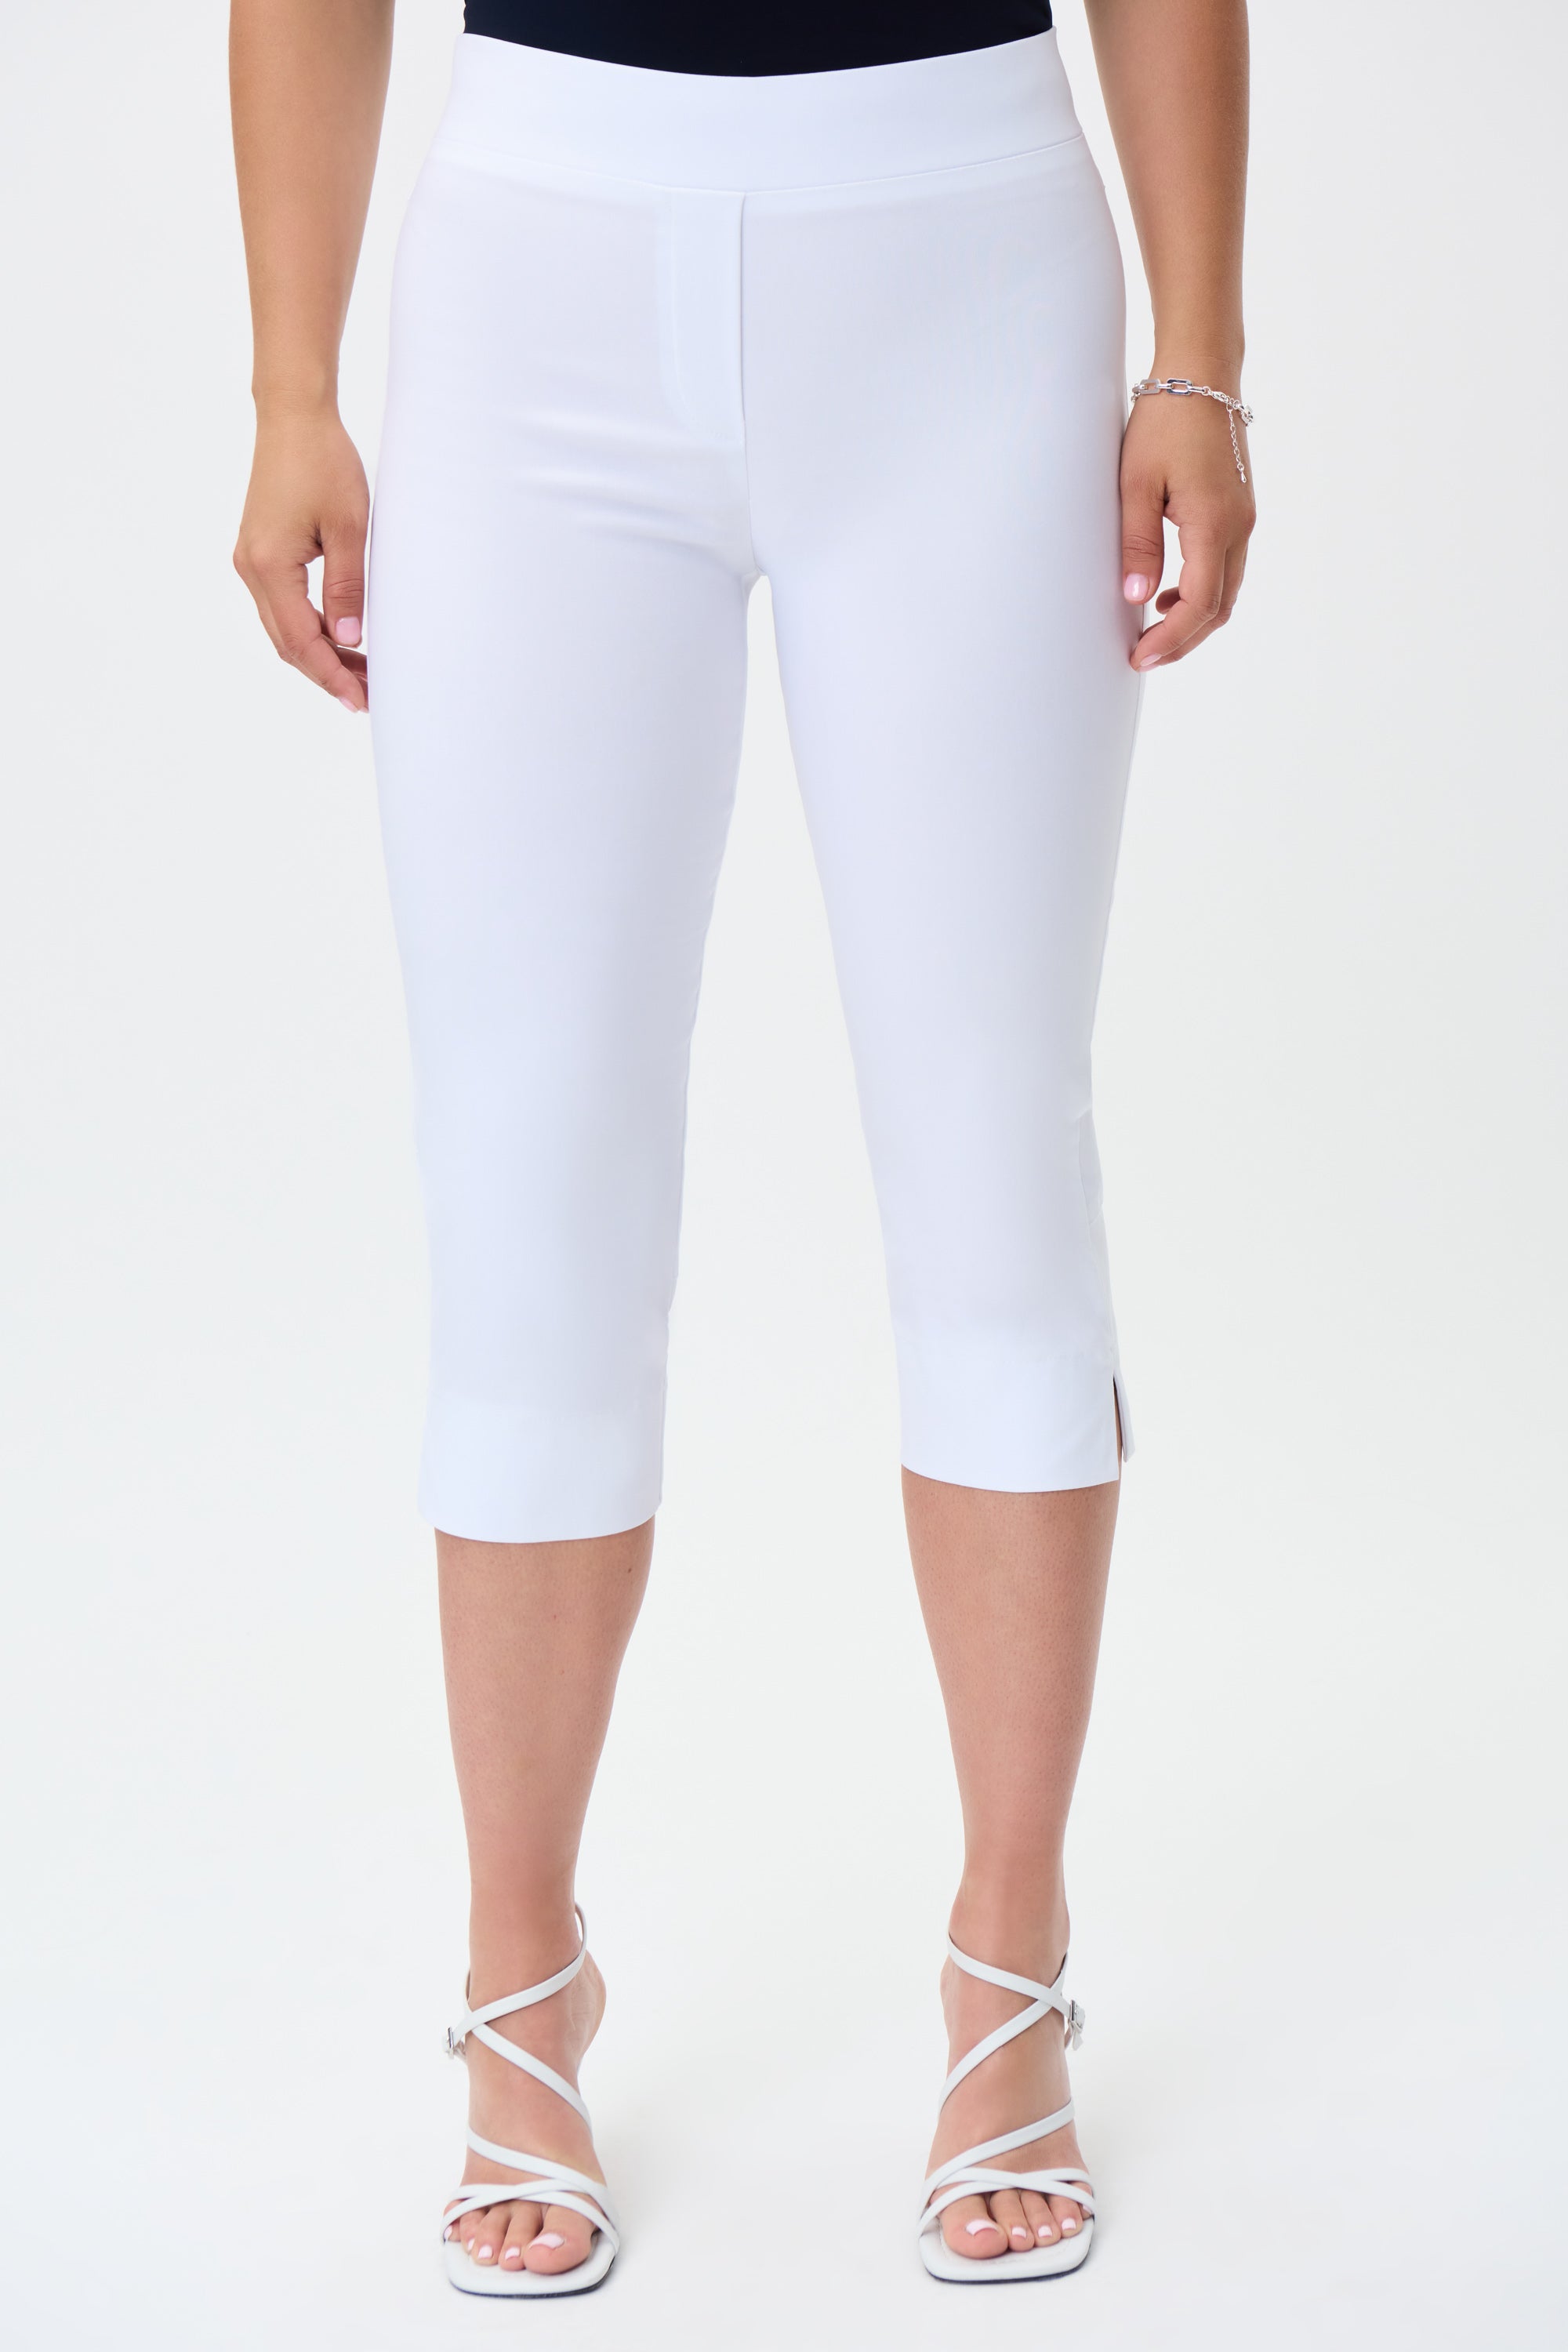 Vince Camuto Twill Cropped Trousers (Plus Size)